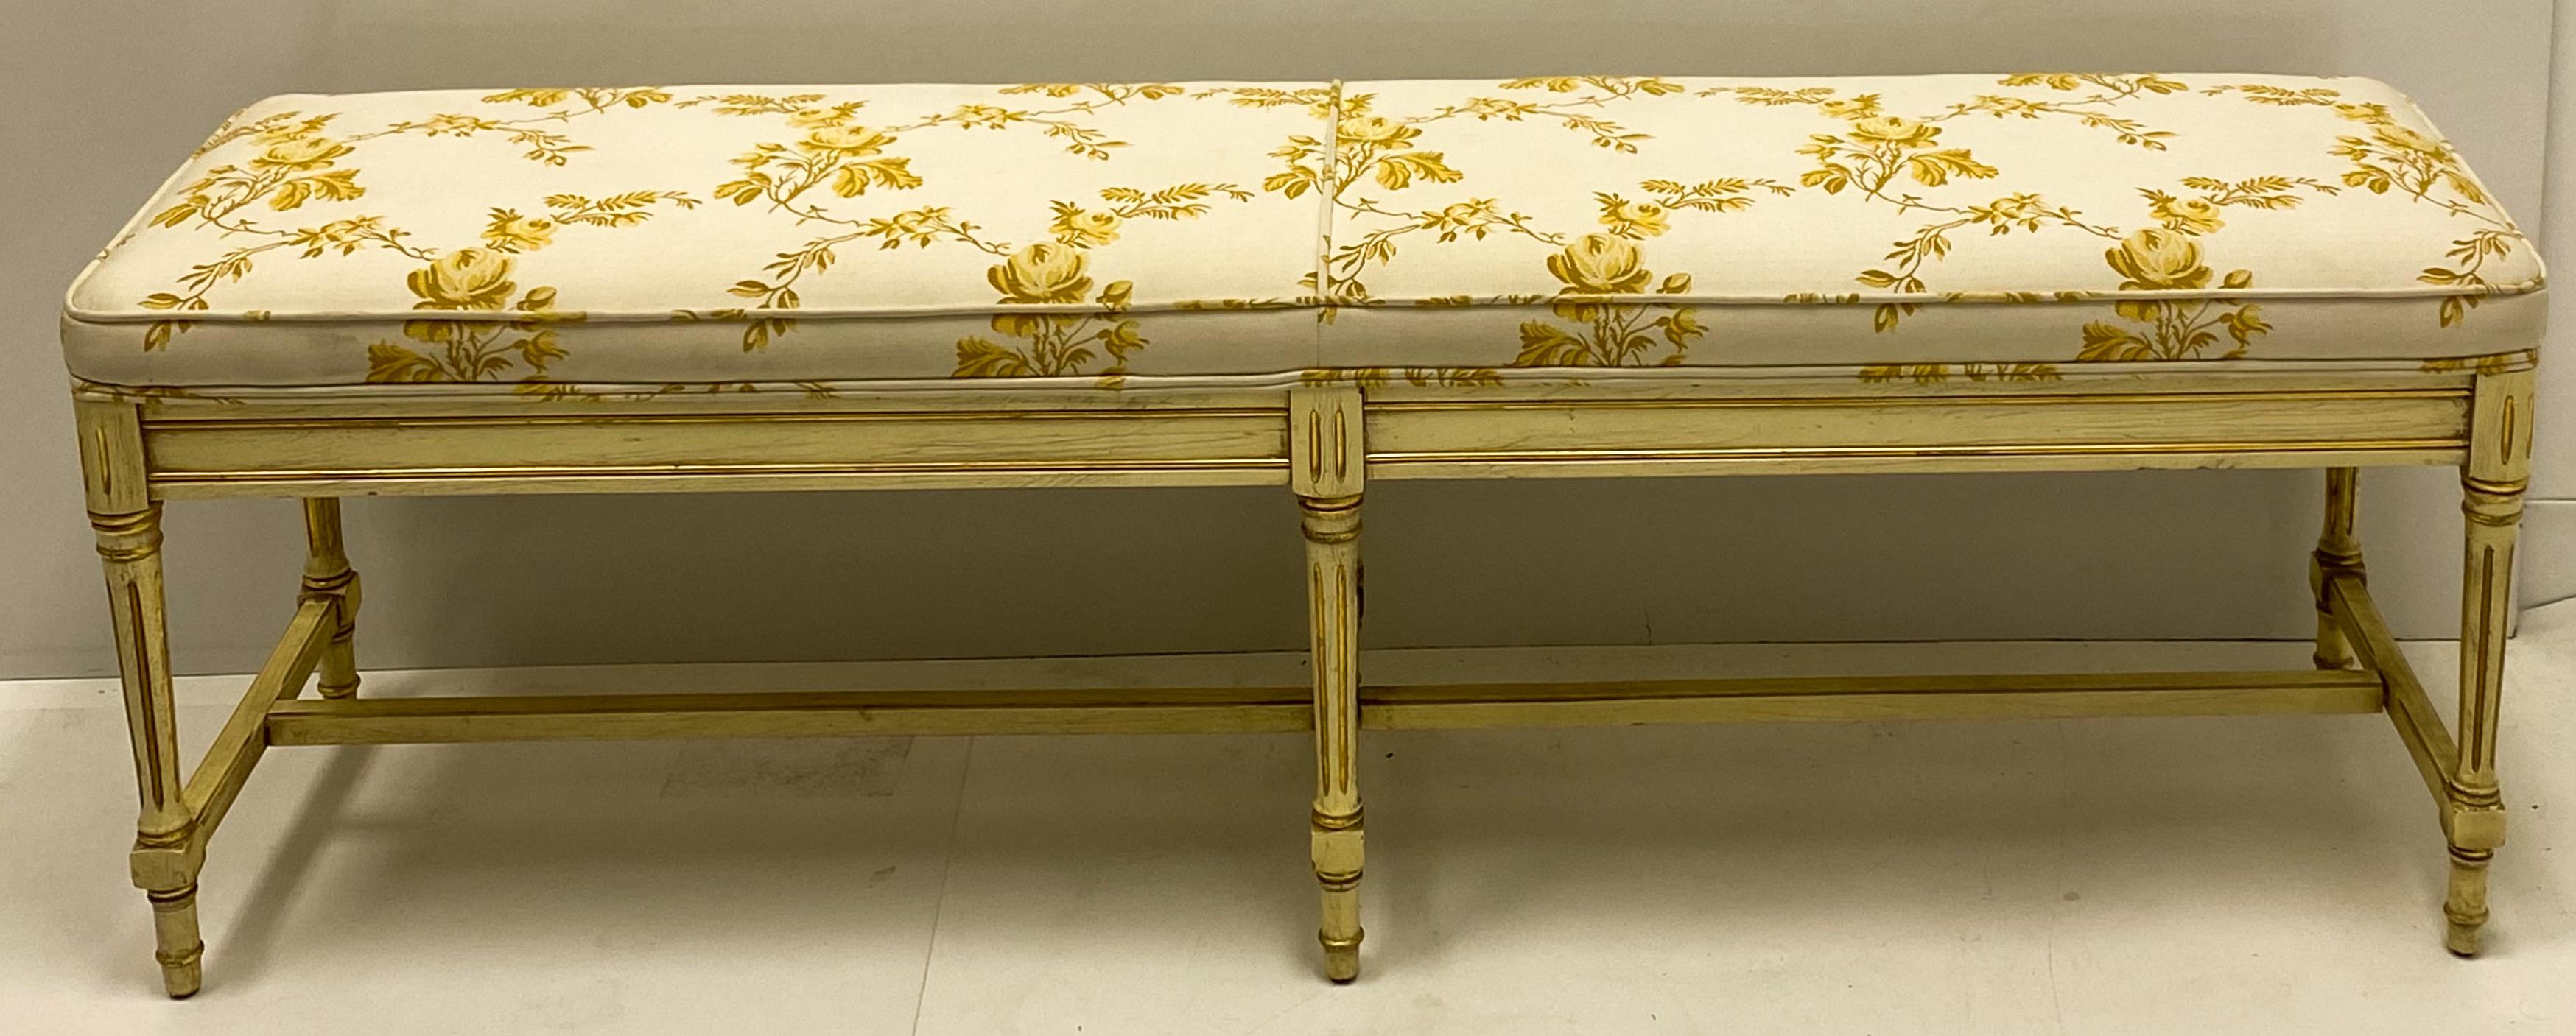 Upholstery Midcentury French Claude Moulin Floral Upholstered Bench / Ottoman